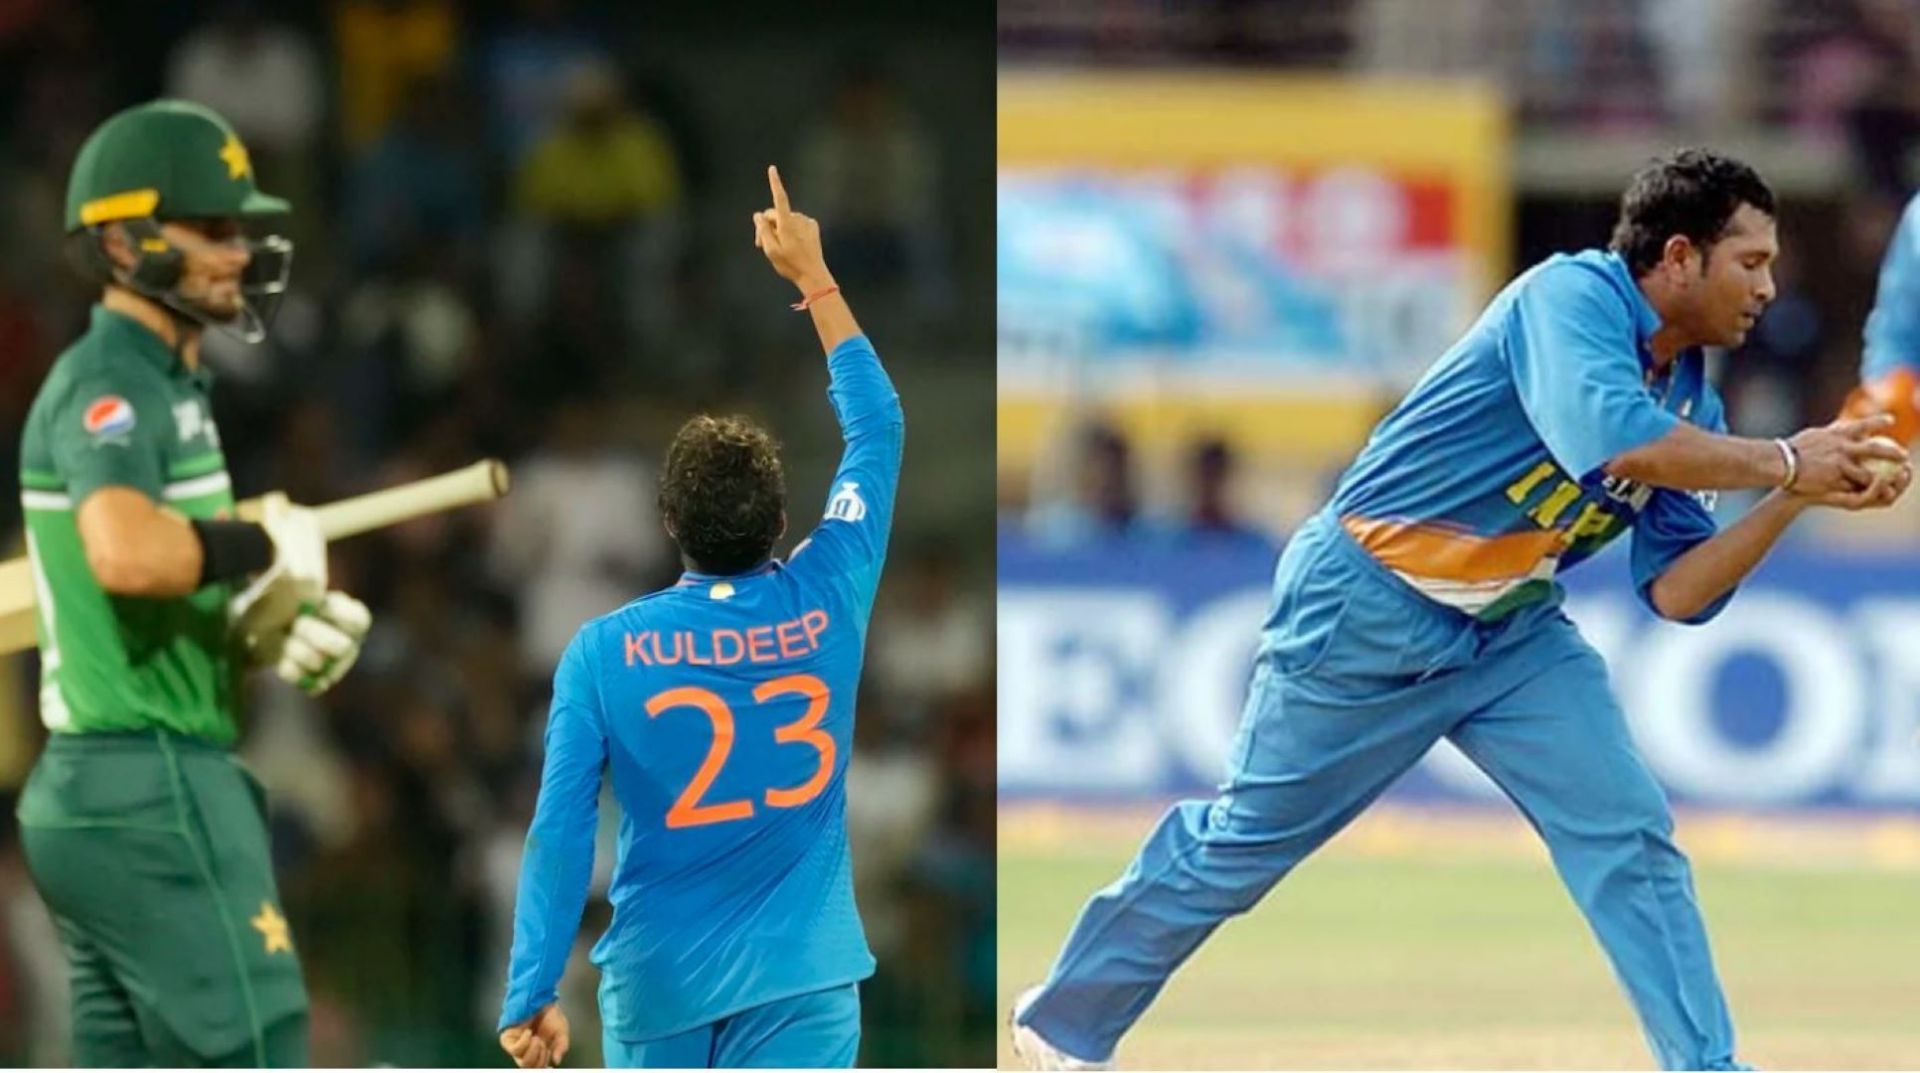 Kuldeep Yadav joined a handful of Indian bowlers with a 5-wicket haul against Pakistan